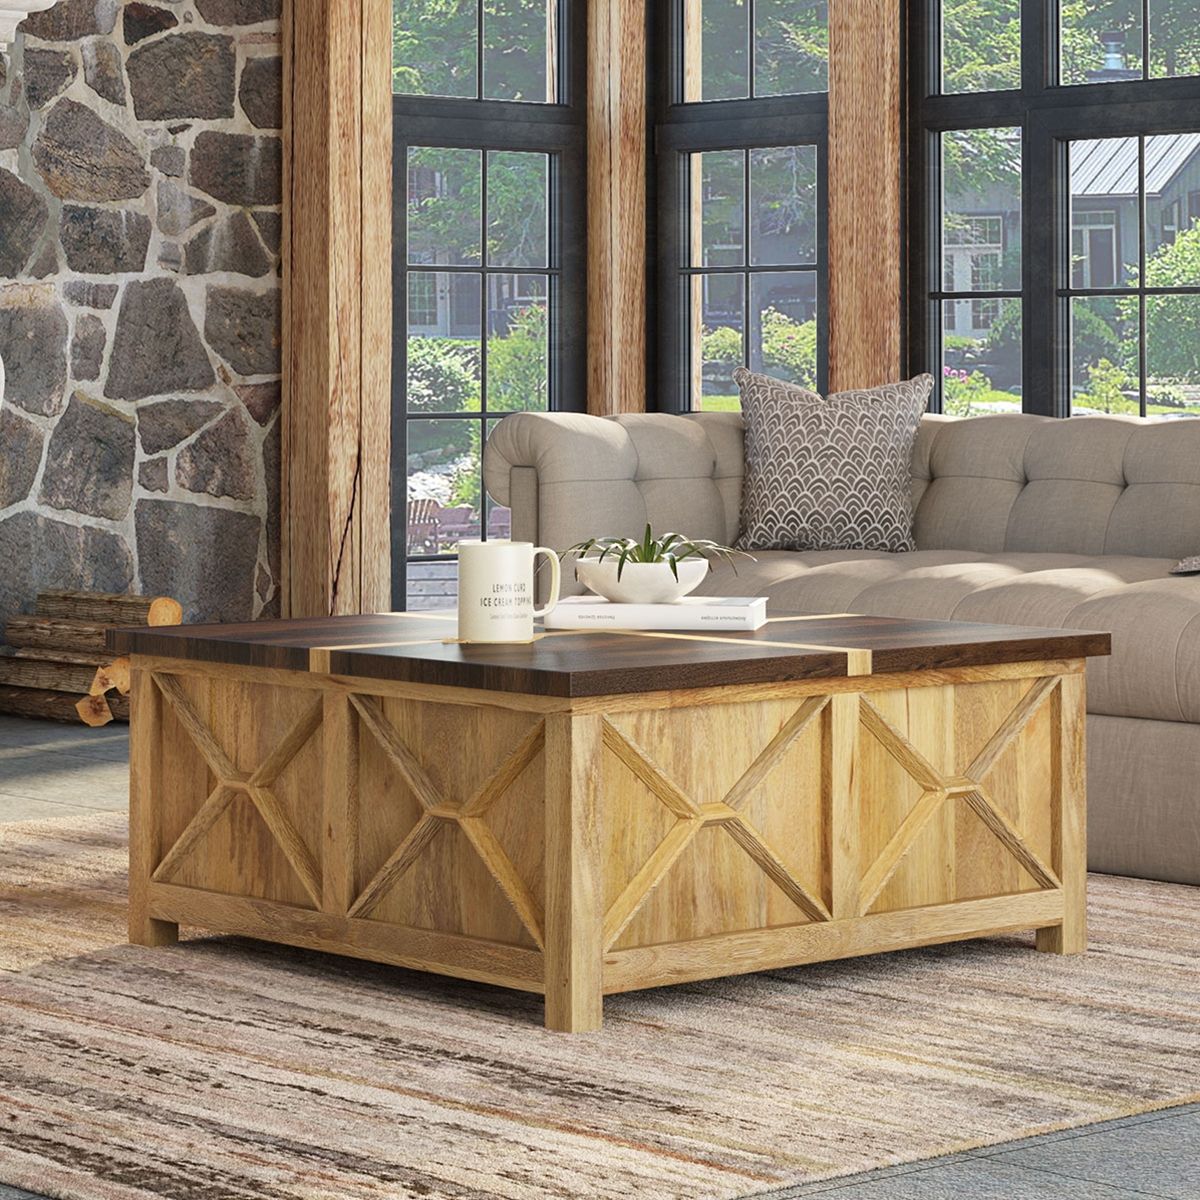 Acireale Rustic Square Farmhouse Coffee Table With Storage. Within Living Room Farmhouse Coffee Tables (Photo 9 of 15)